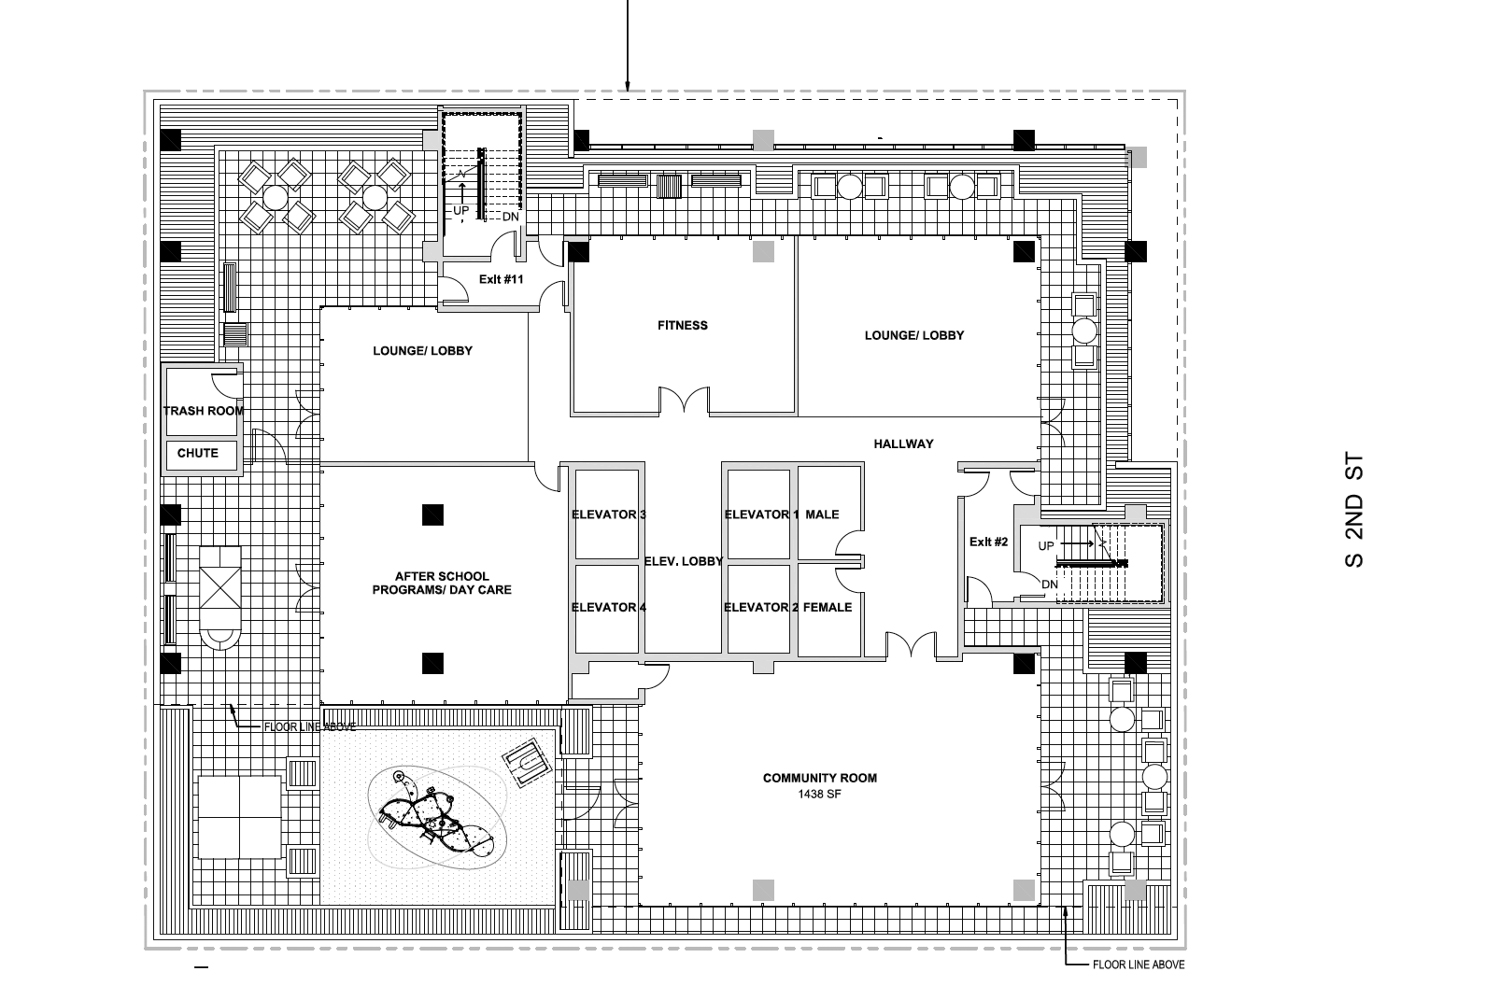 605 2nd Street second-story floor plan, rendering courtesy Anderson Architects